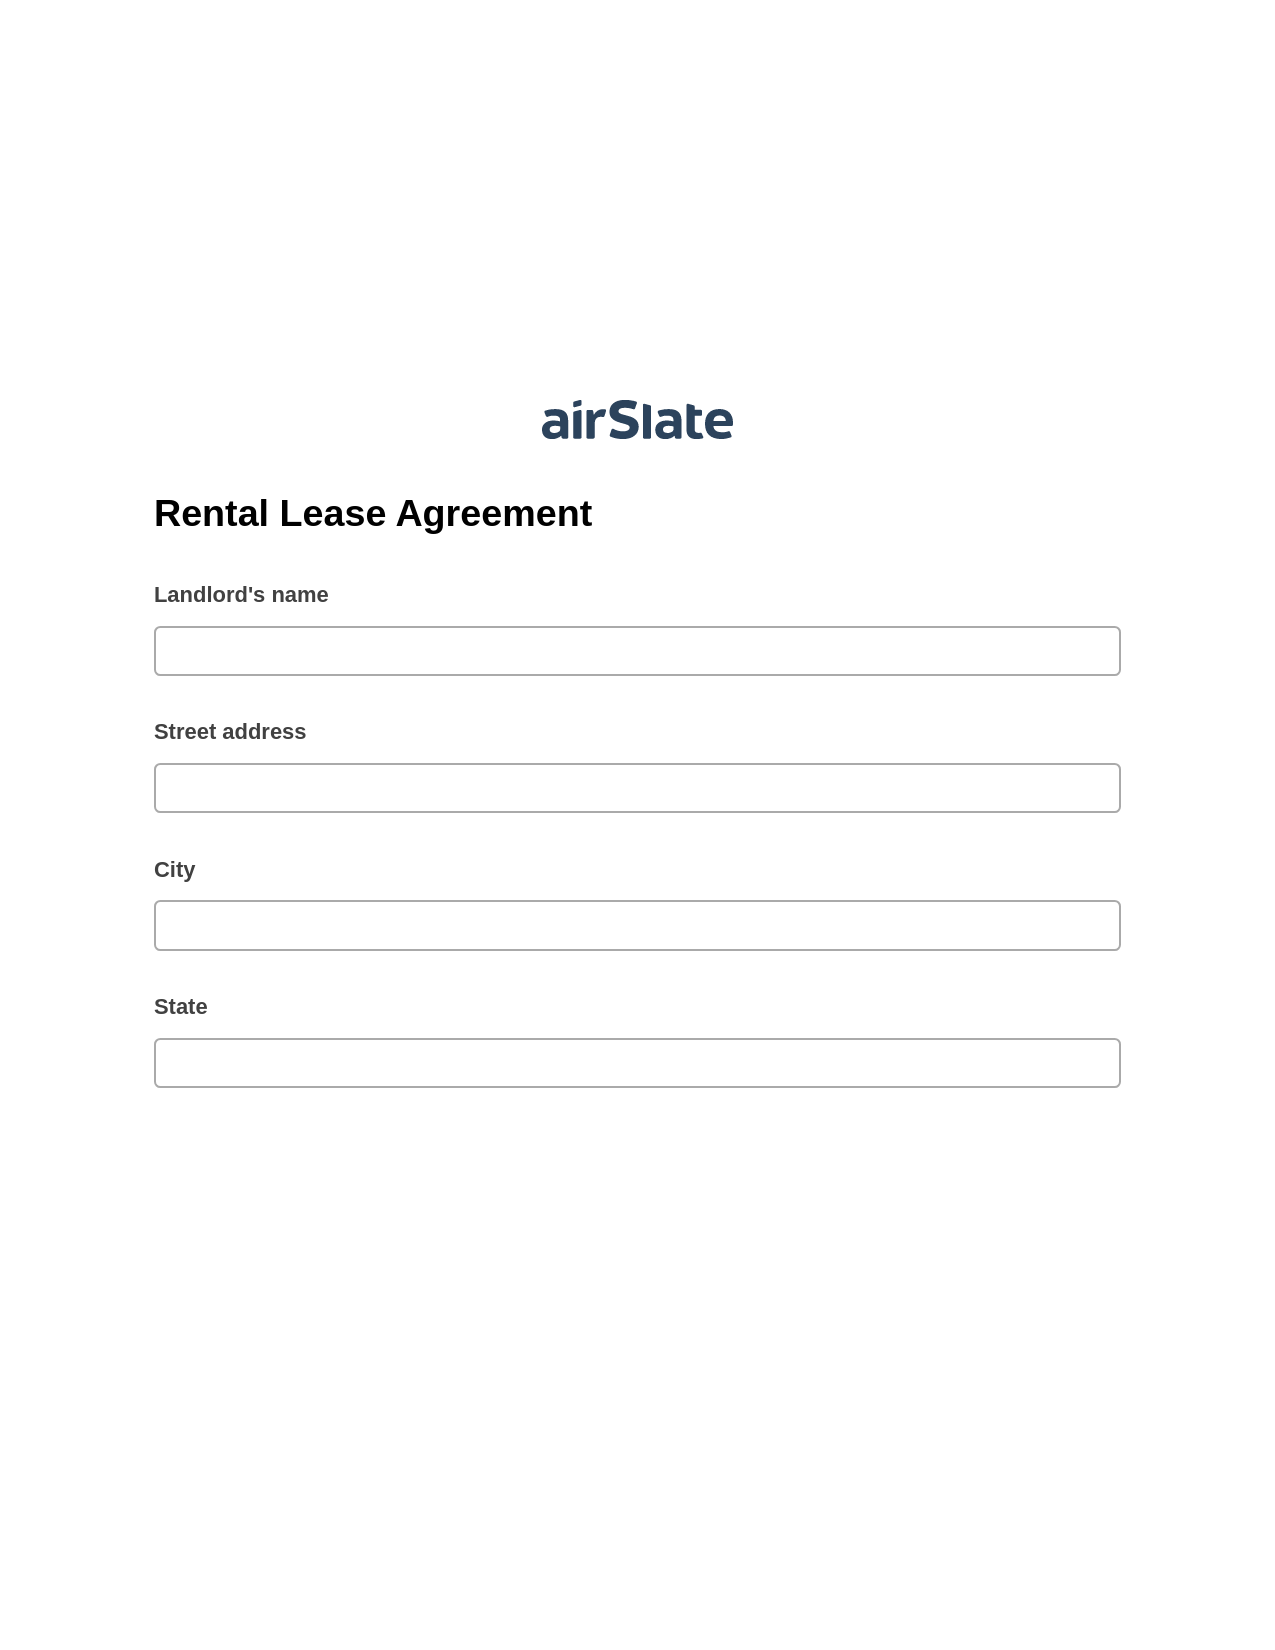 Rental Lease Agreement Pre-fill Slate from MS Dynamics 365 Records Bot, Google Cloud Print Bot, OneDrive Bot